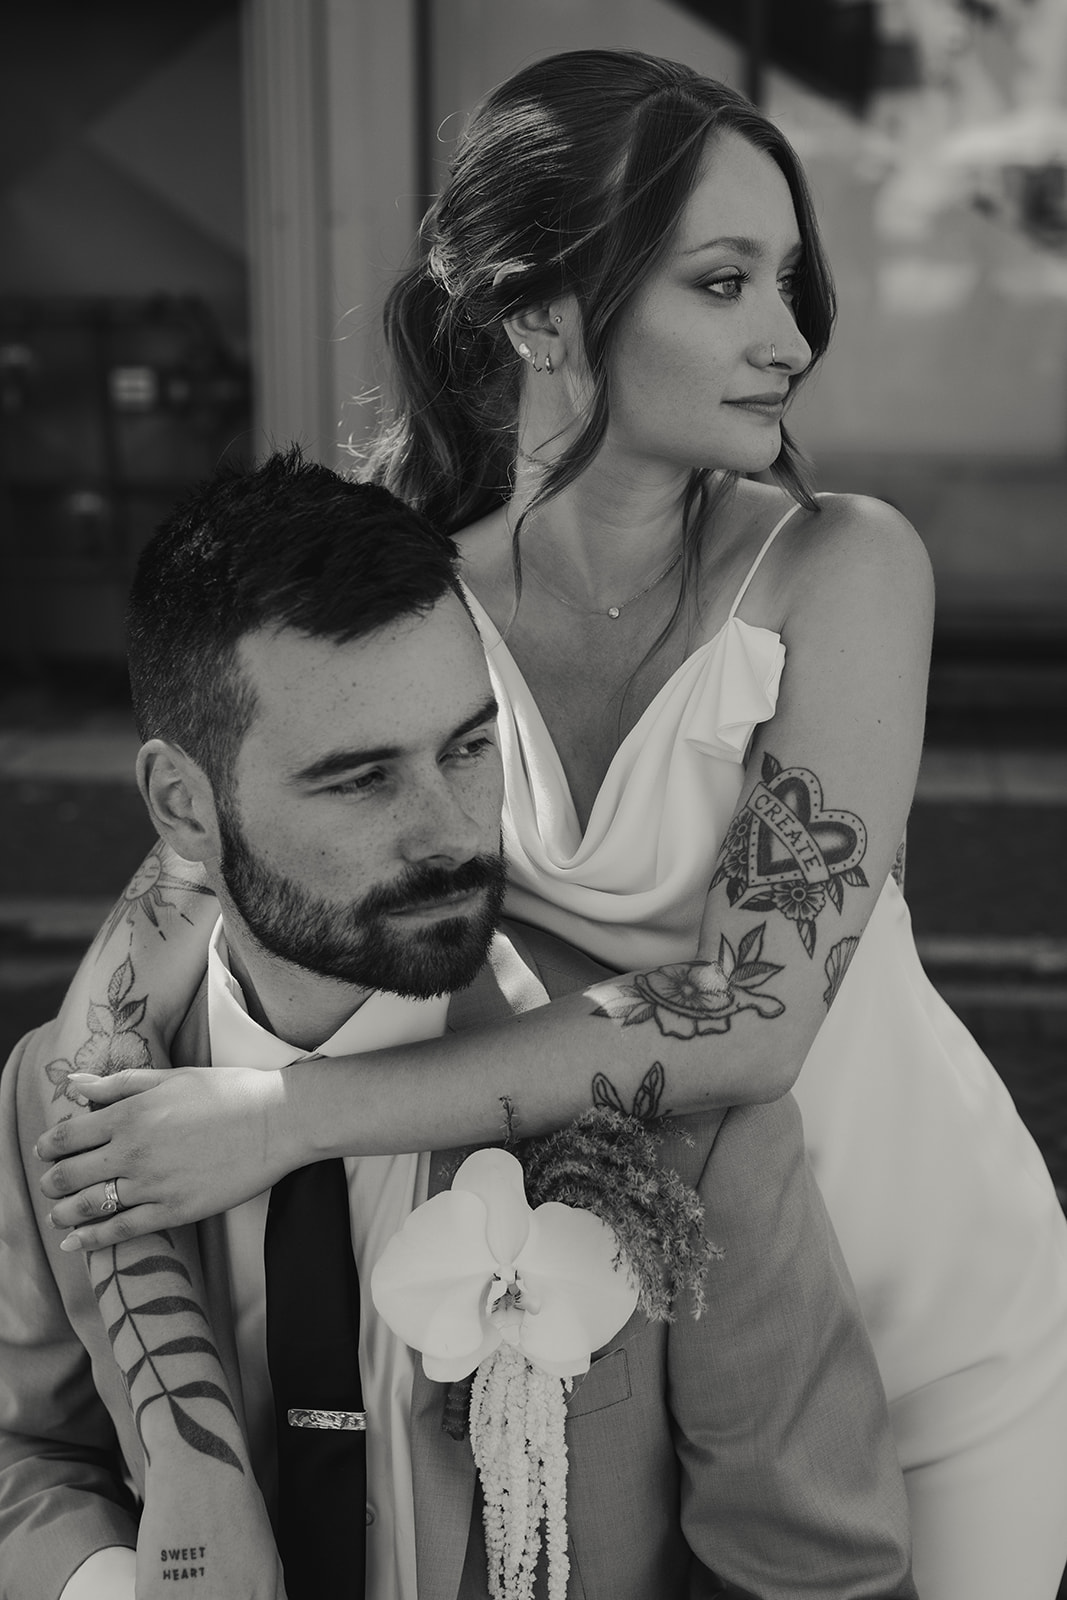 Moody bride and groom portrait captured by Jeff and Cat of The Apartment Photo. Bride wearing sleek satin gown with low back by Savannah Miller. 